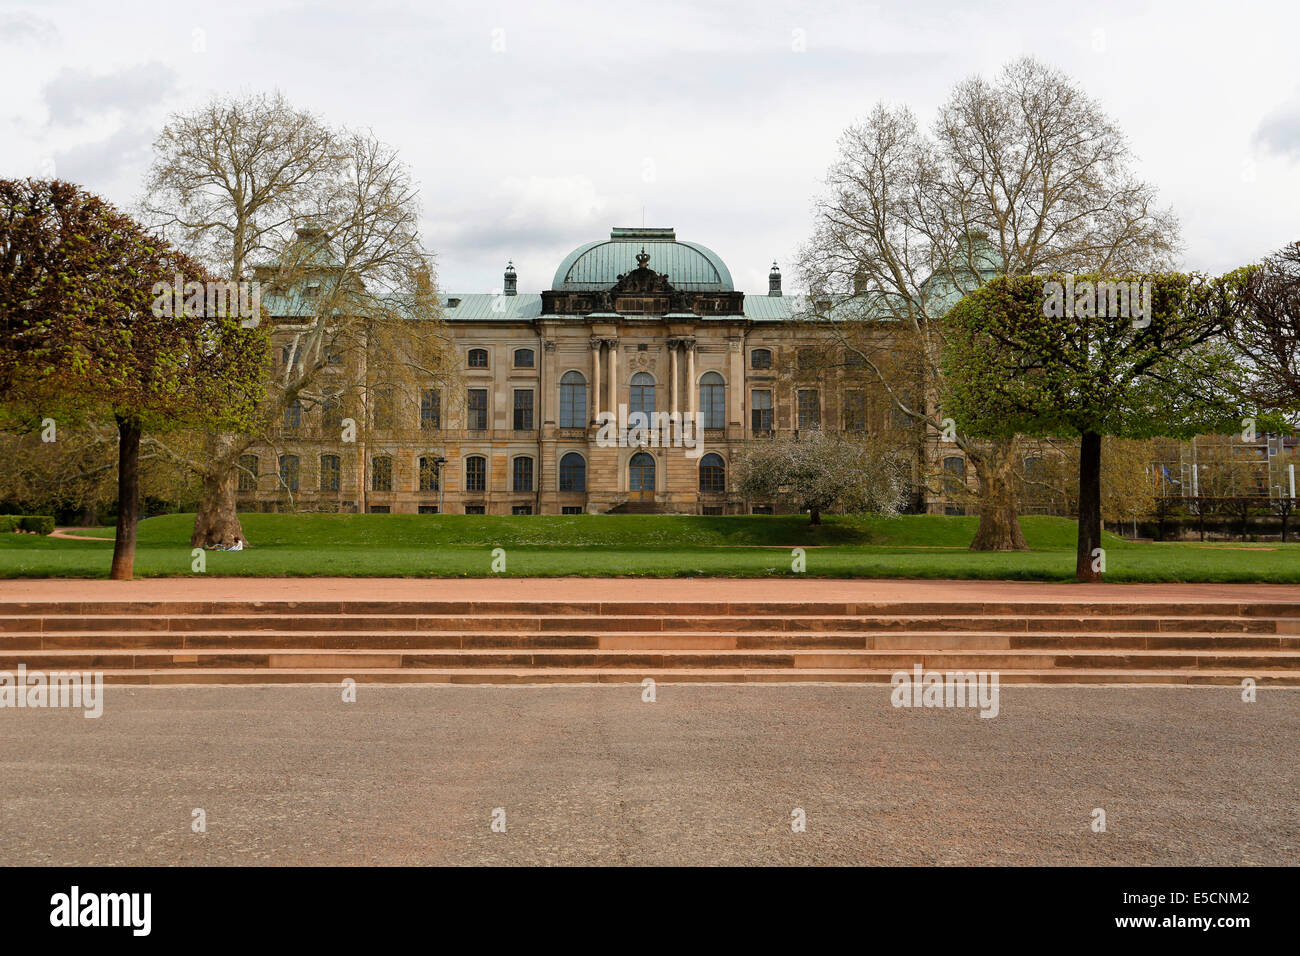 Japanisches Palais, or Japanese Palace, on the right bank of the river Elbe, Dresden, Saxony, Germany Stock Photo